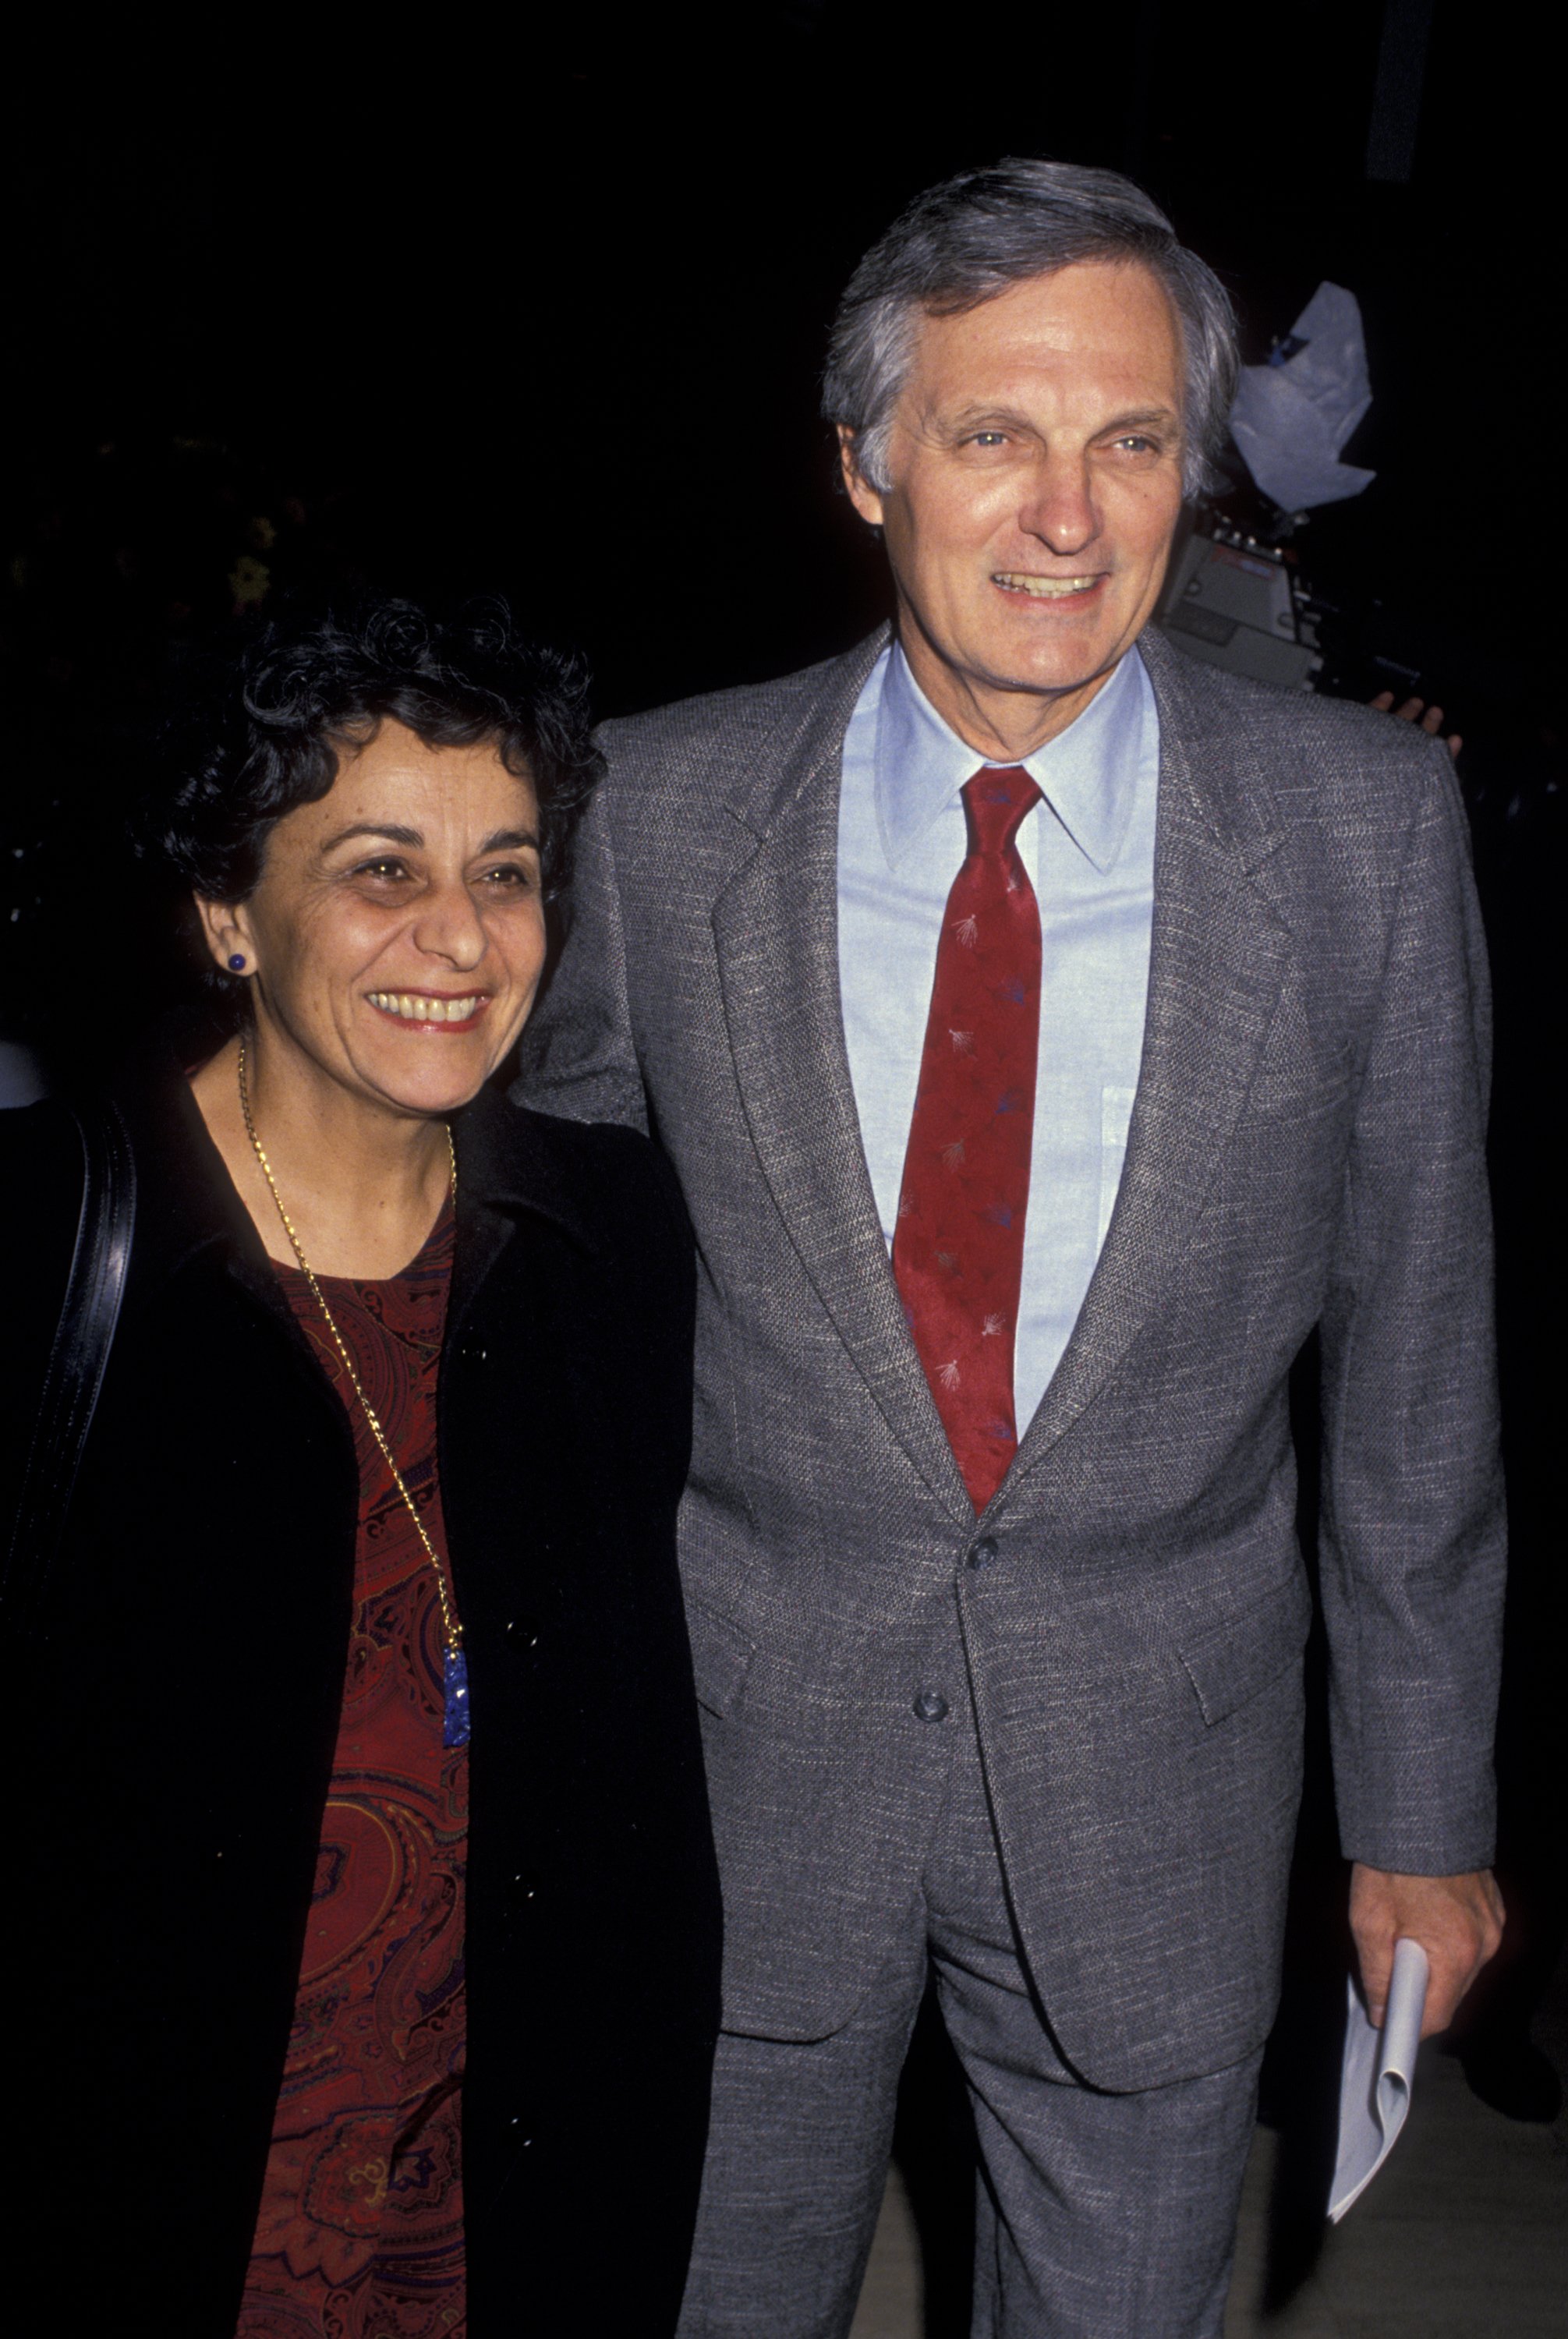 Alan Alda and his wife Arlene Weiss attend Seventh Annual Television Broadcasting Festival at the Los Angeles Museum of Art on March 5, 1990, in Los Angeles, California. | Source: Getty Images